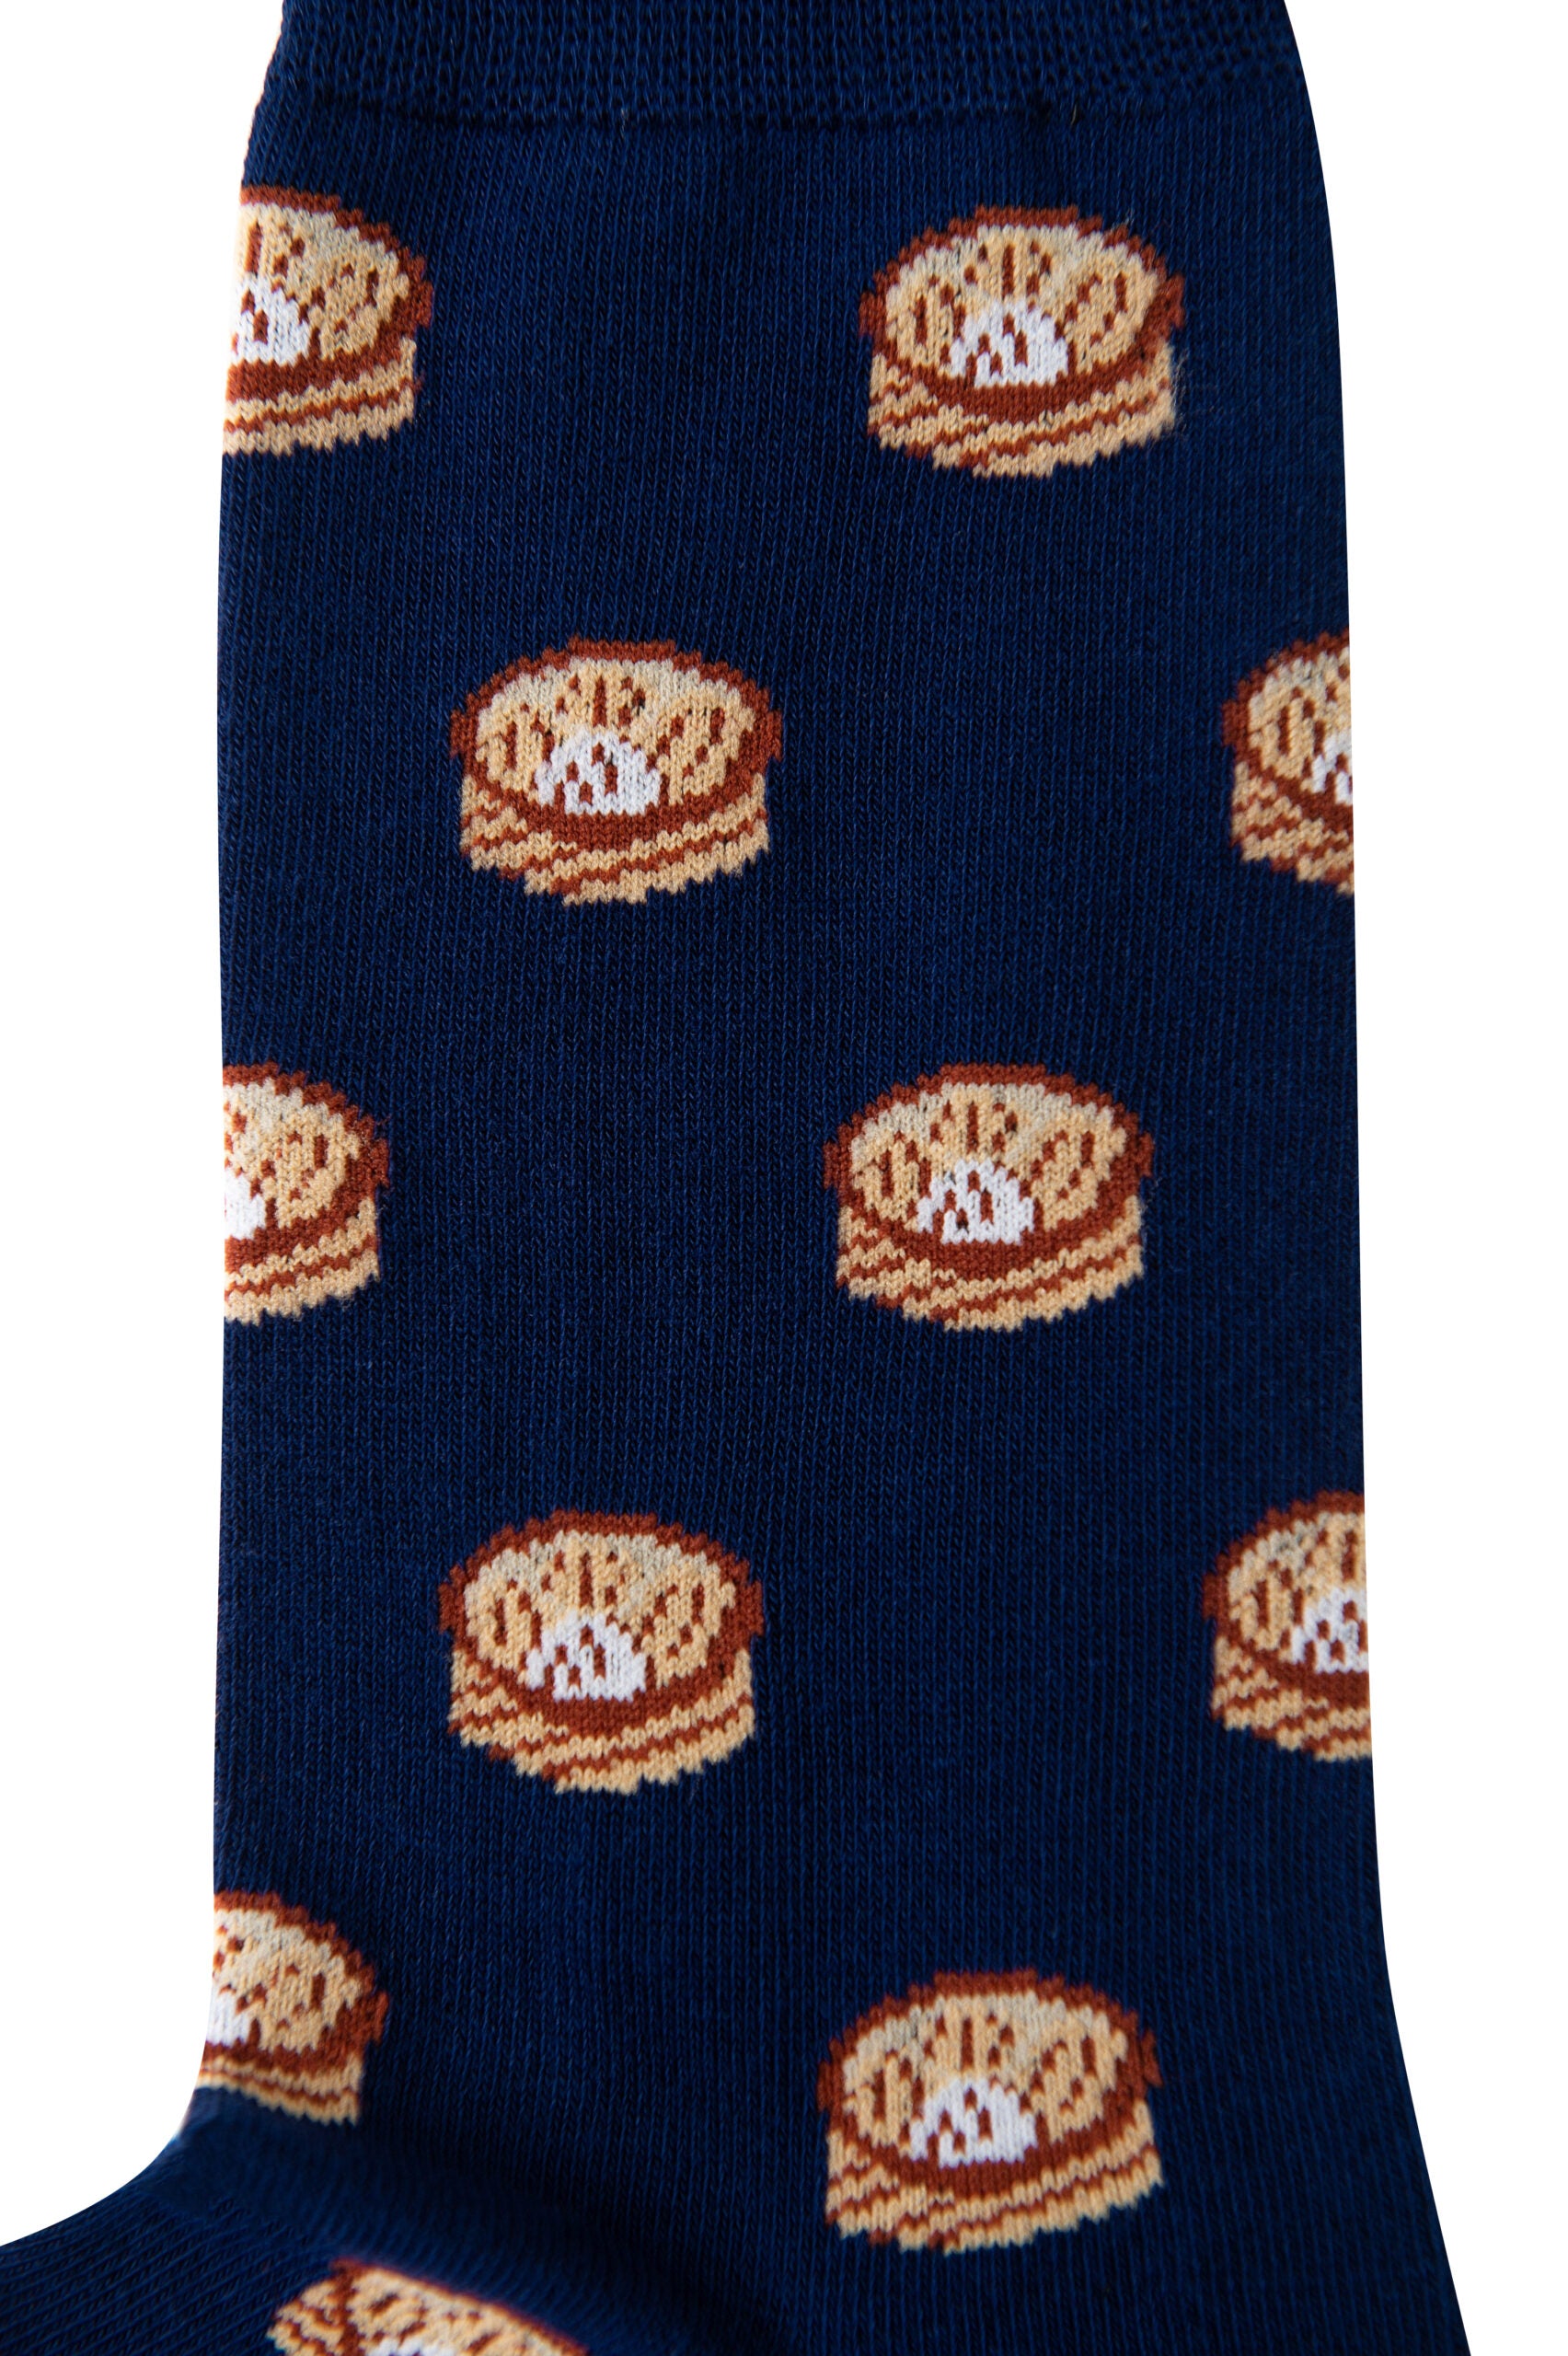 A blue and white knitted Dumpling Socks fabric with a pattern of food that resembles socks.